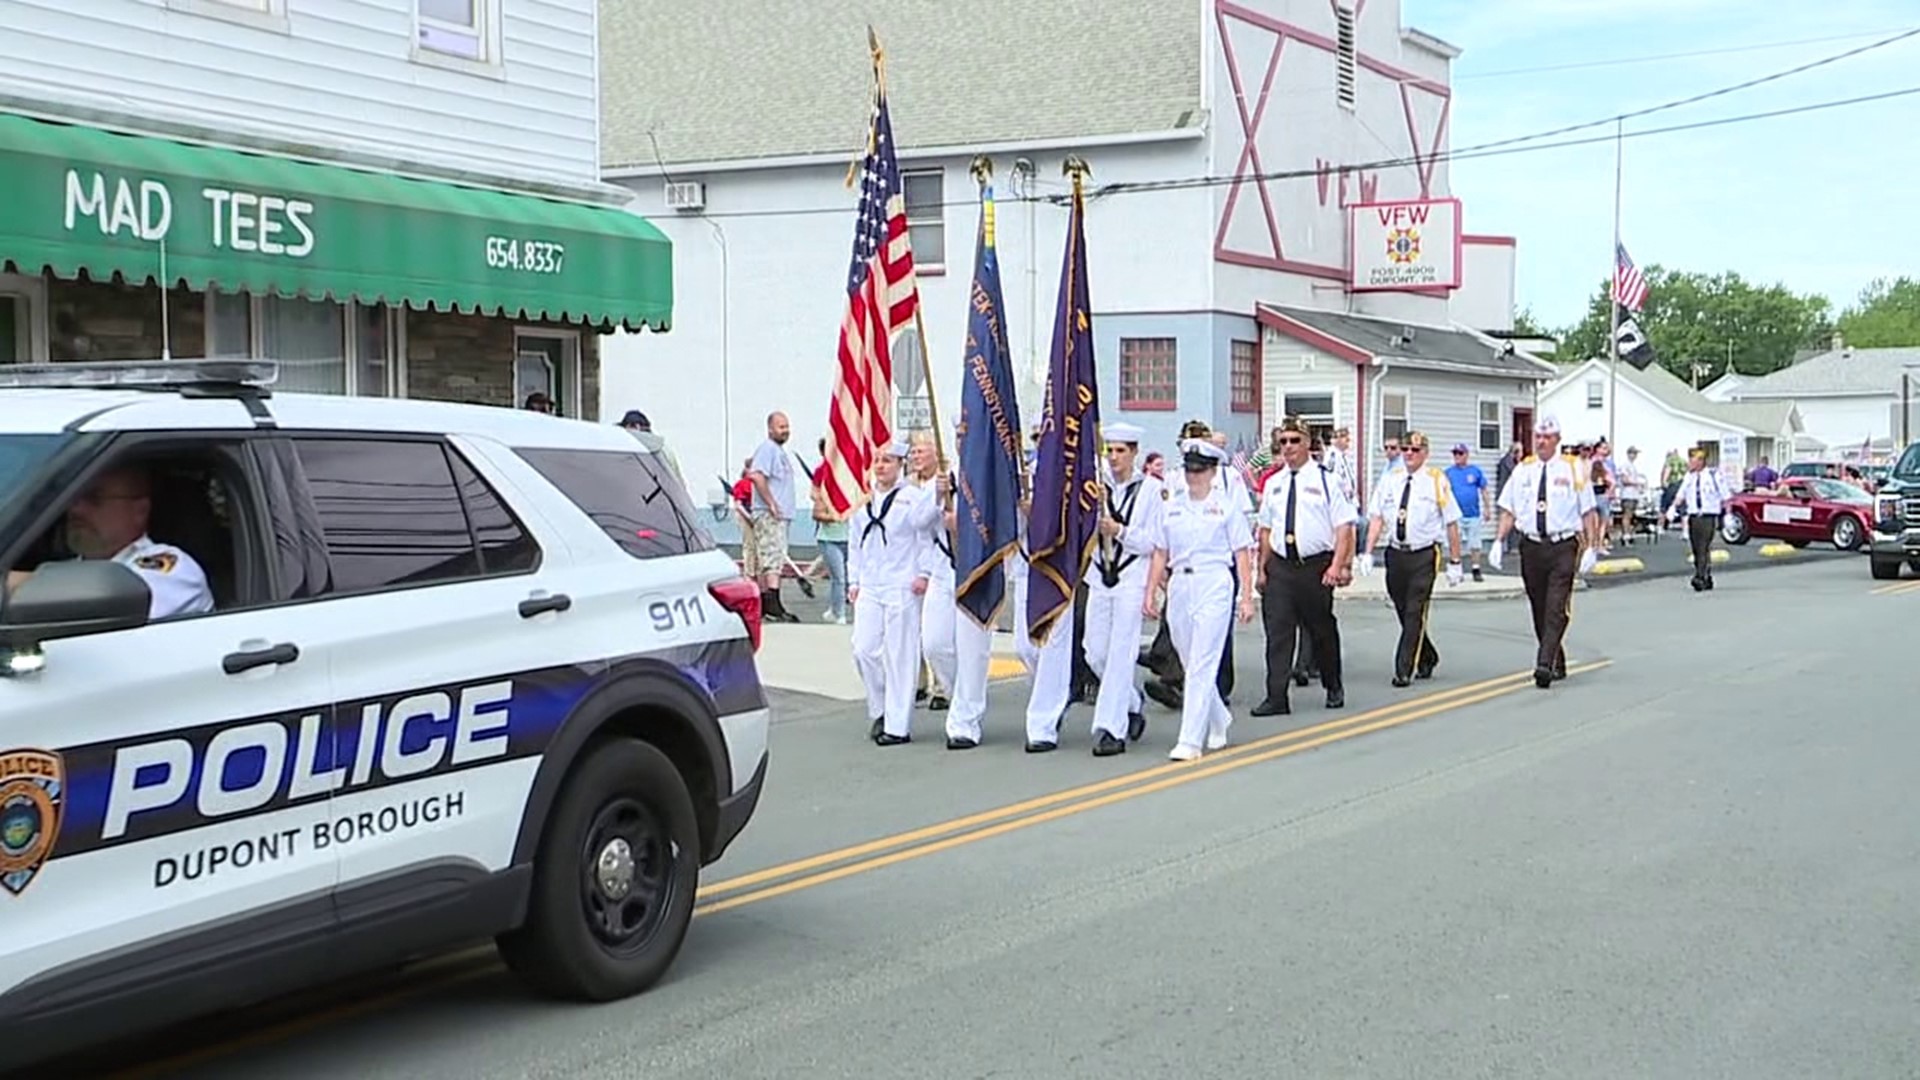 On this Memorial Day, a parade and ceremony were held in Dupont to honor the fallen as well as a mayor.